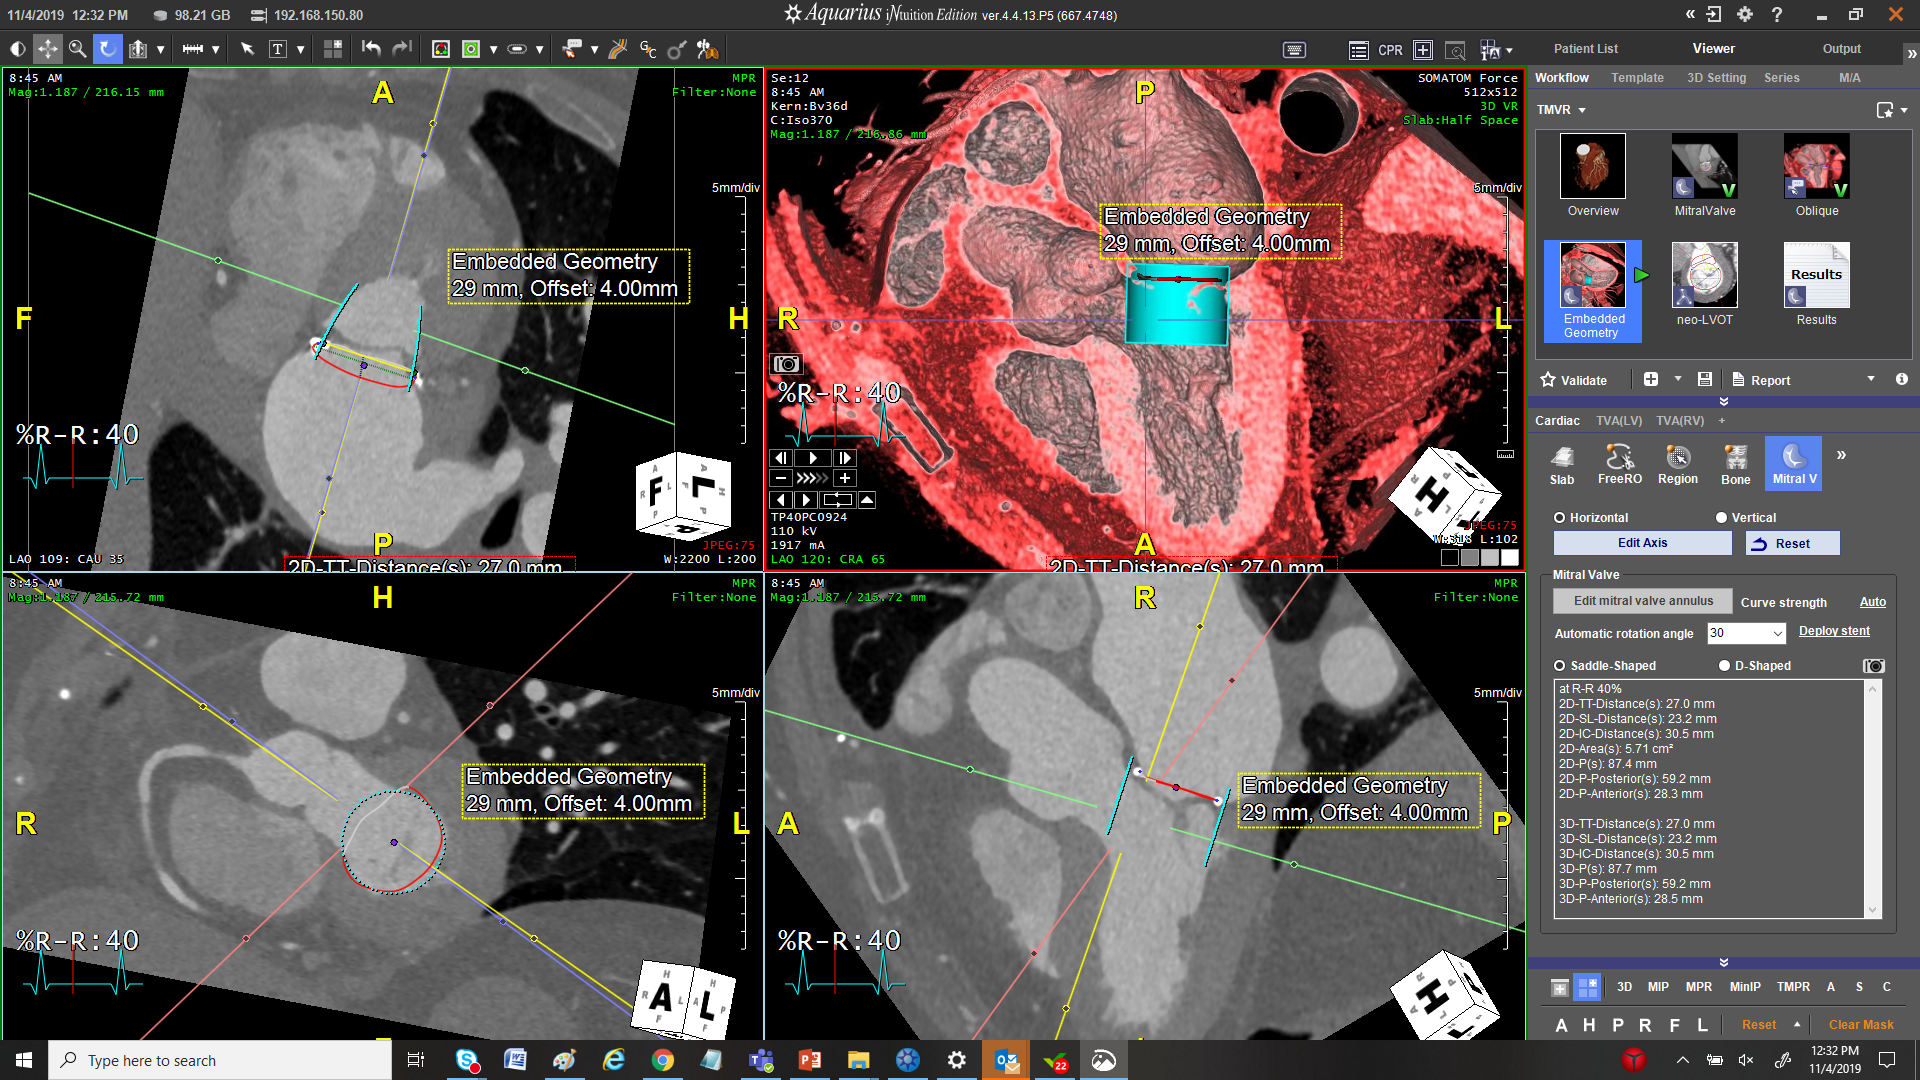 Embedded Geometry tools to visualize valve and stent placements. 